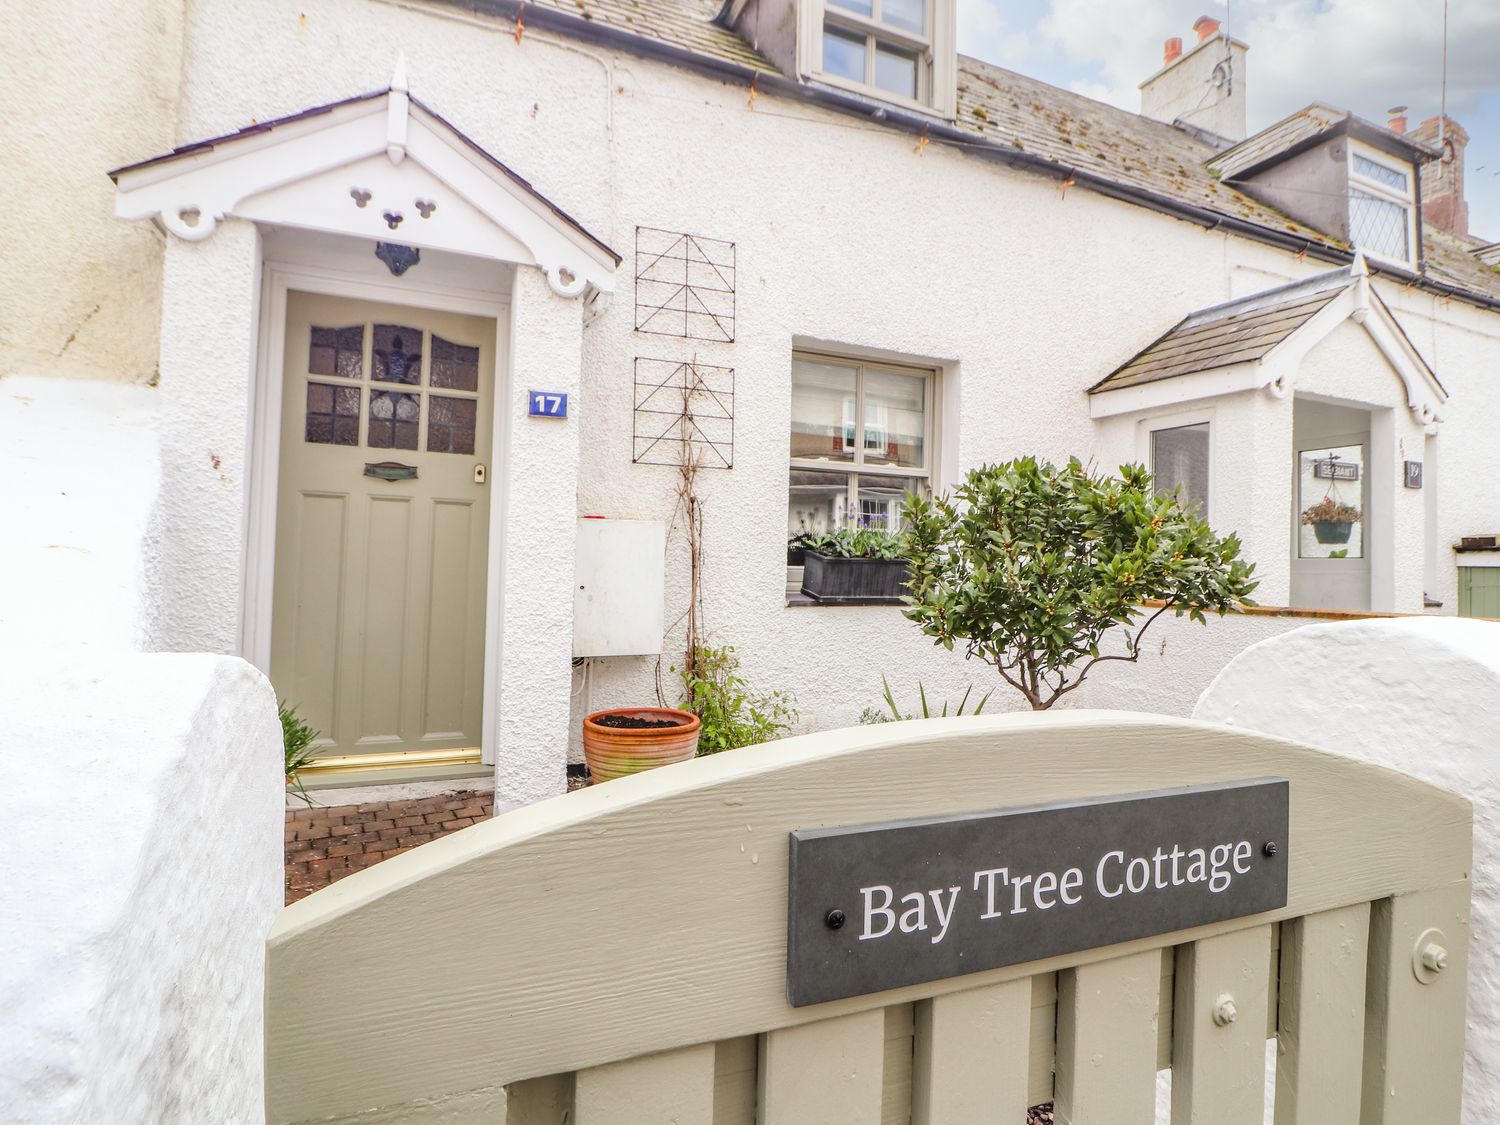 Bay Tree Cottage - Anglesey - 1096880 - photo 1